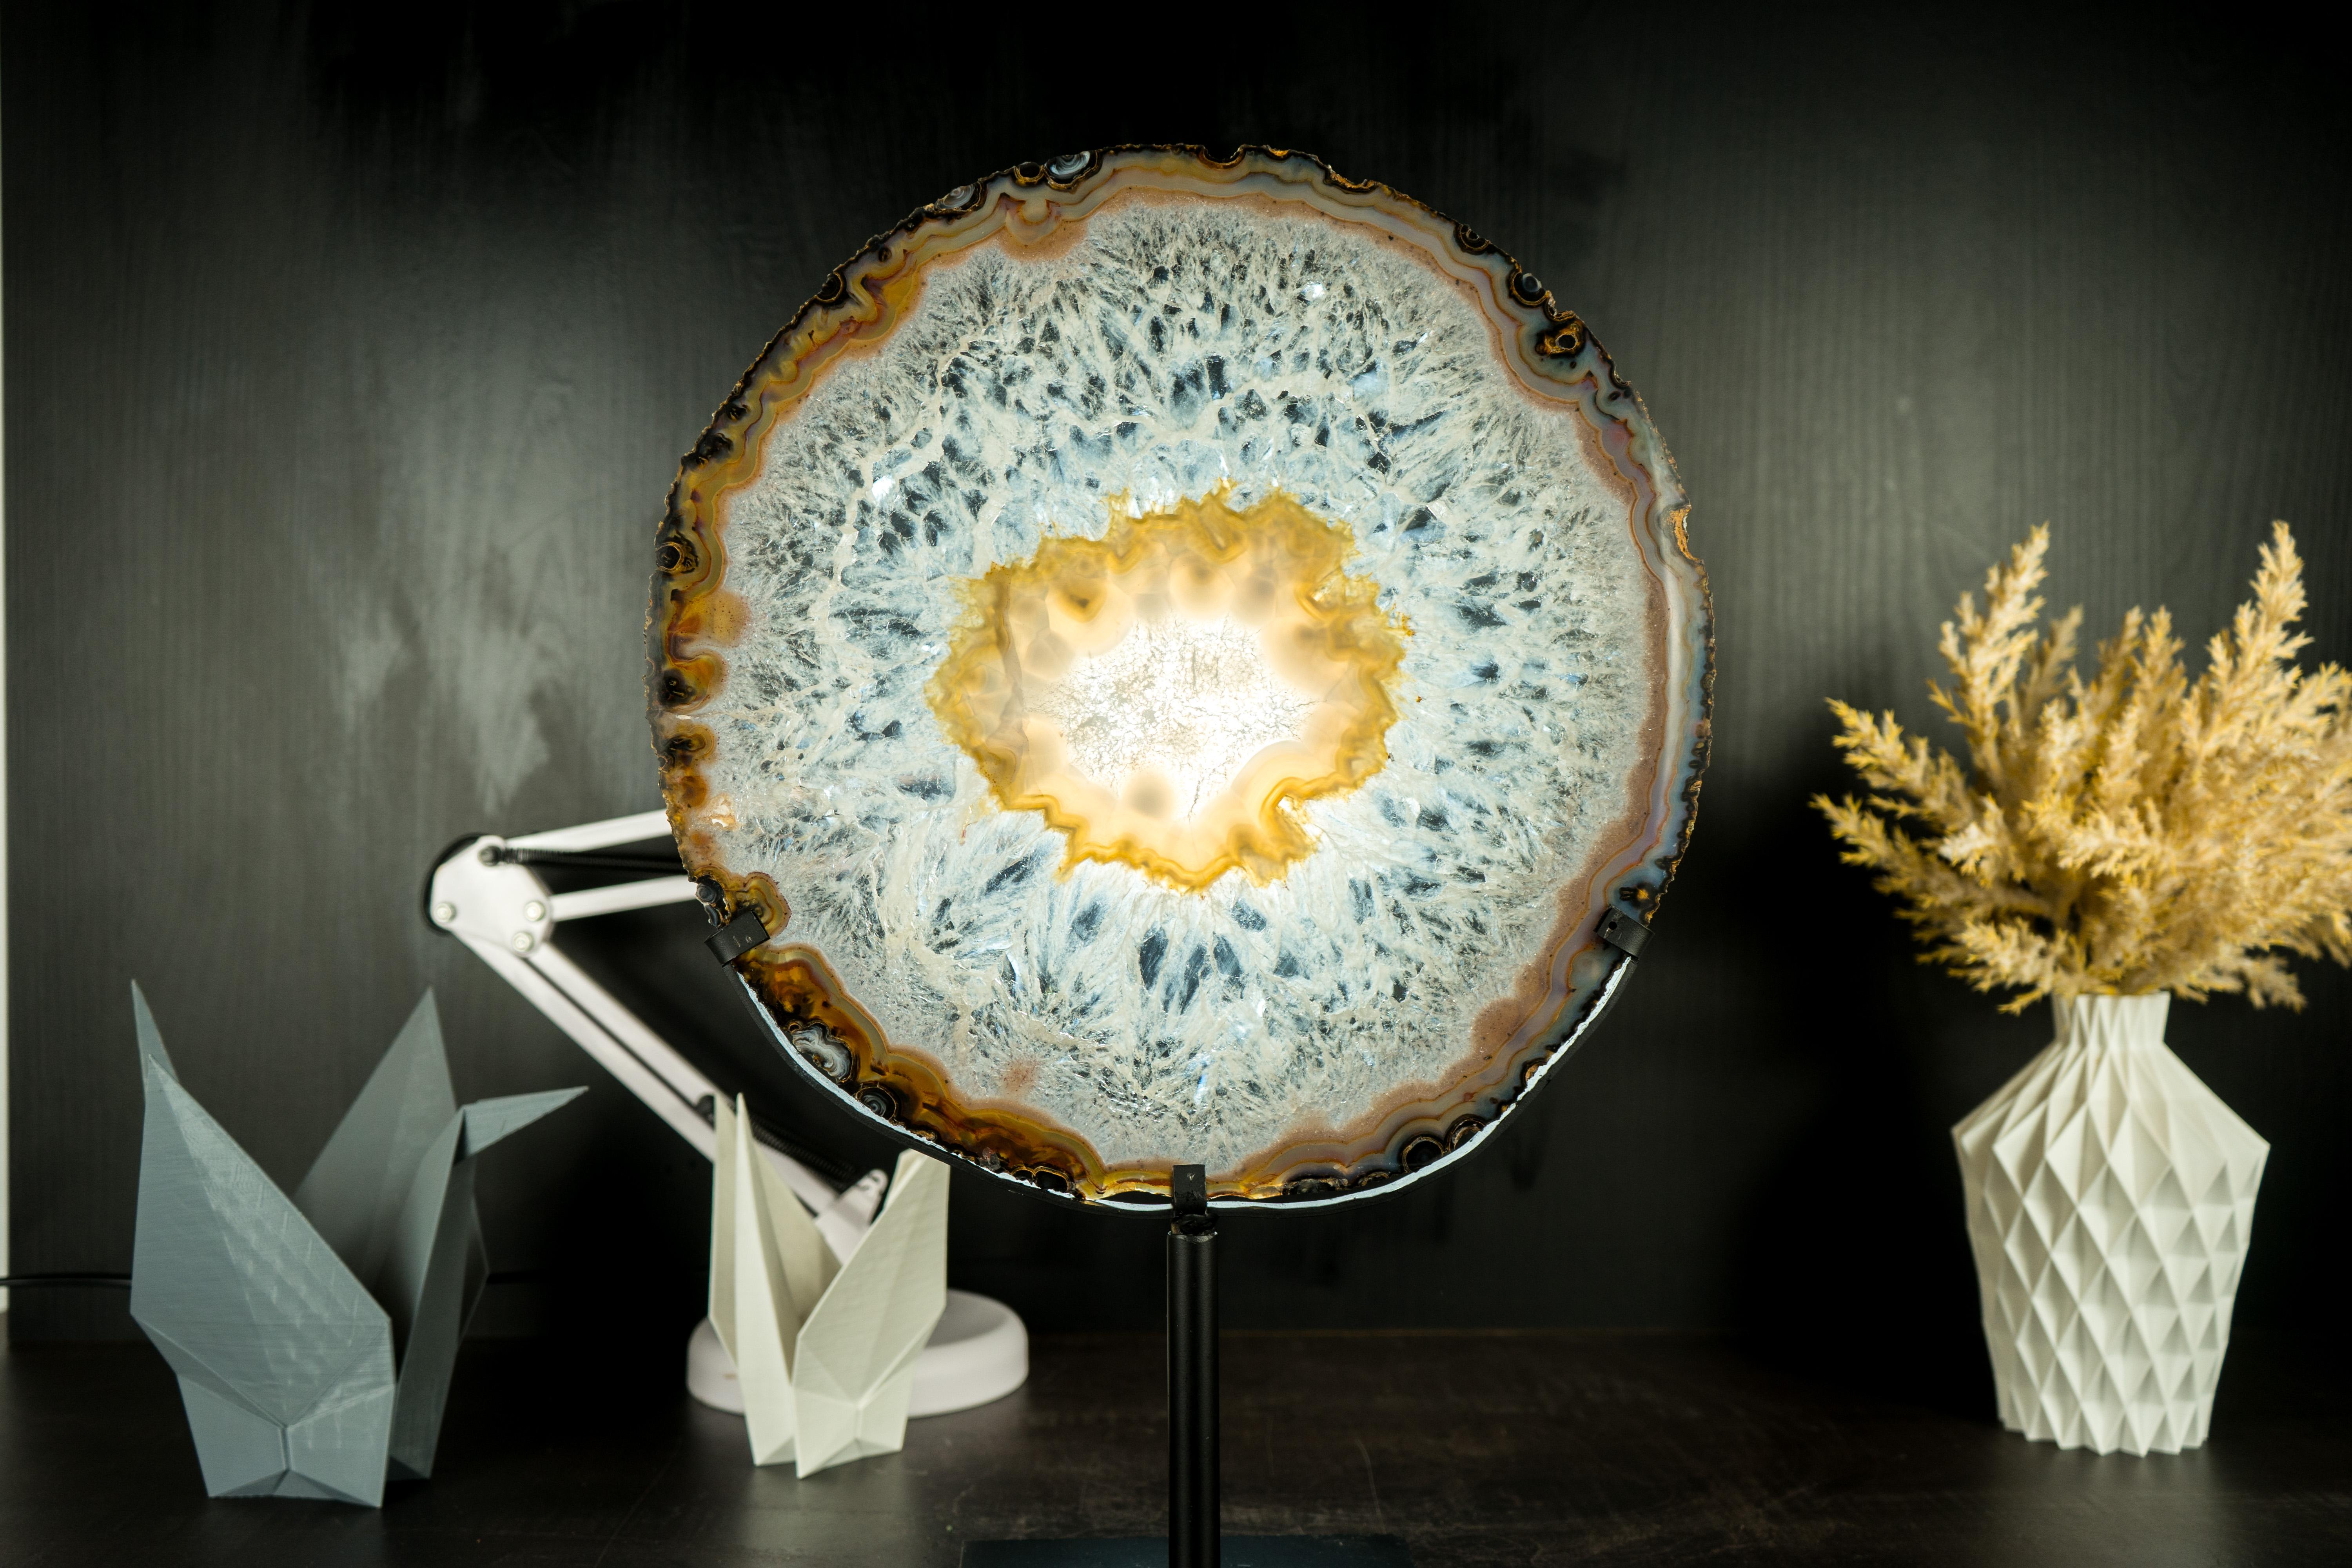 Gallery Grade Large Lace Agate Slice, with Ice-Like Crystal and Colorful Agate 3